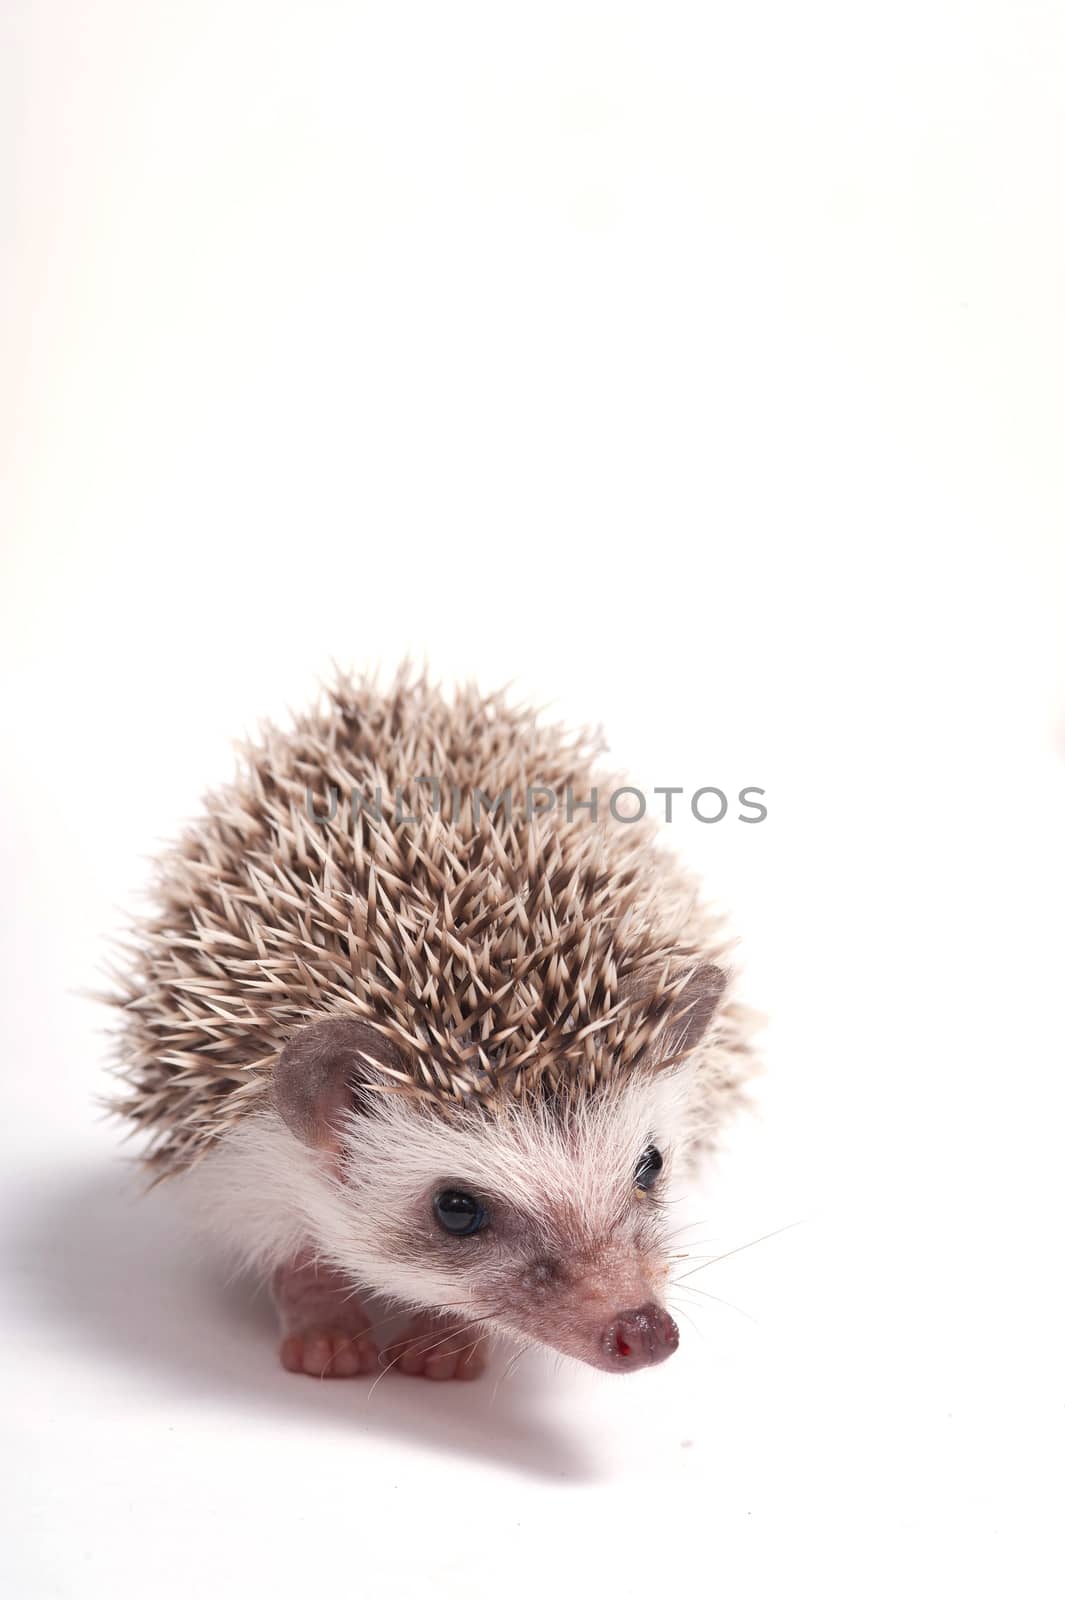 Hedgehog isolate on white background by think4photop